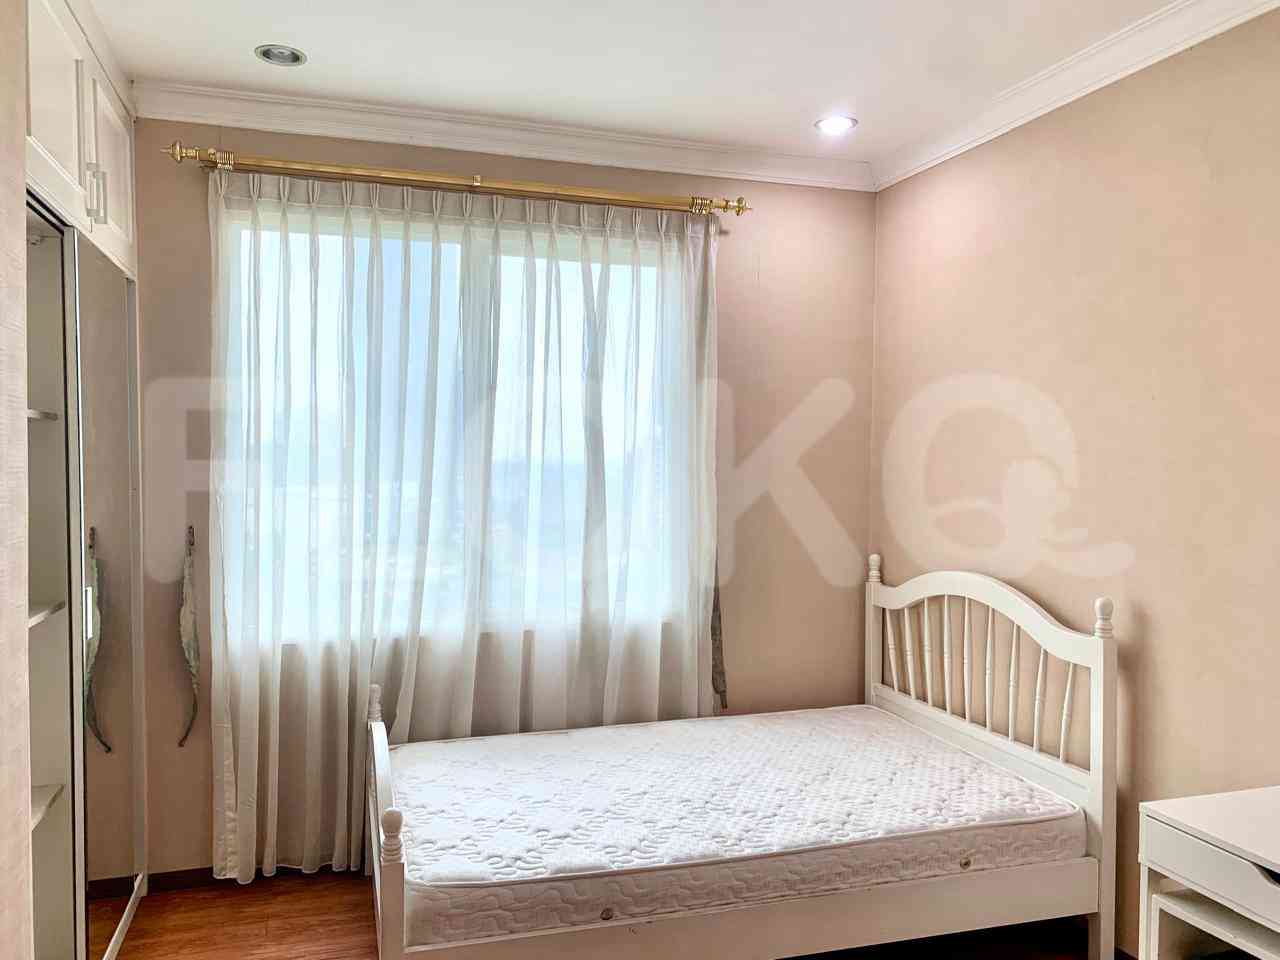 2 Bedroom on 8th Floor for Rent in Thamrin Executive Residence - fthdda 4